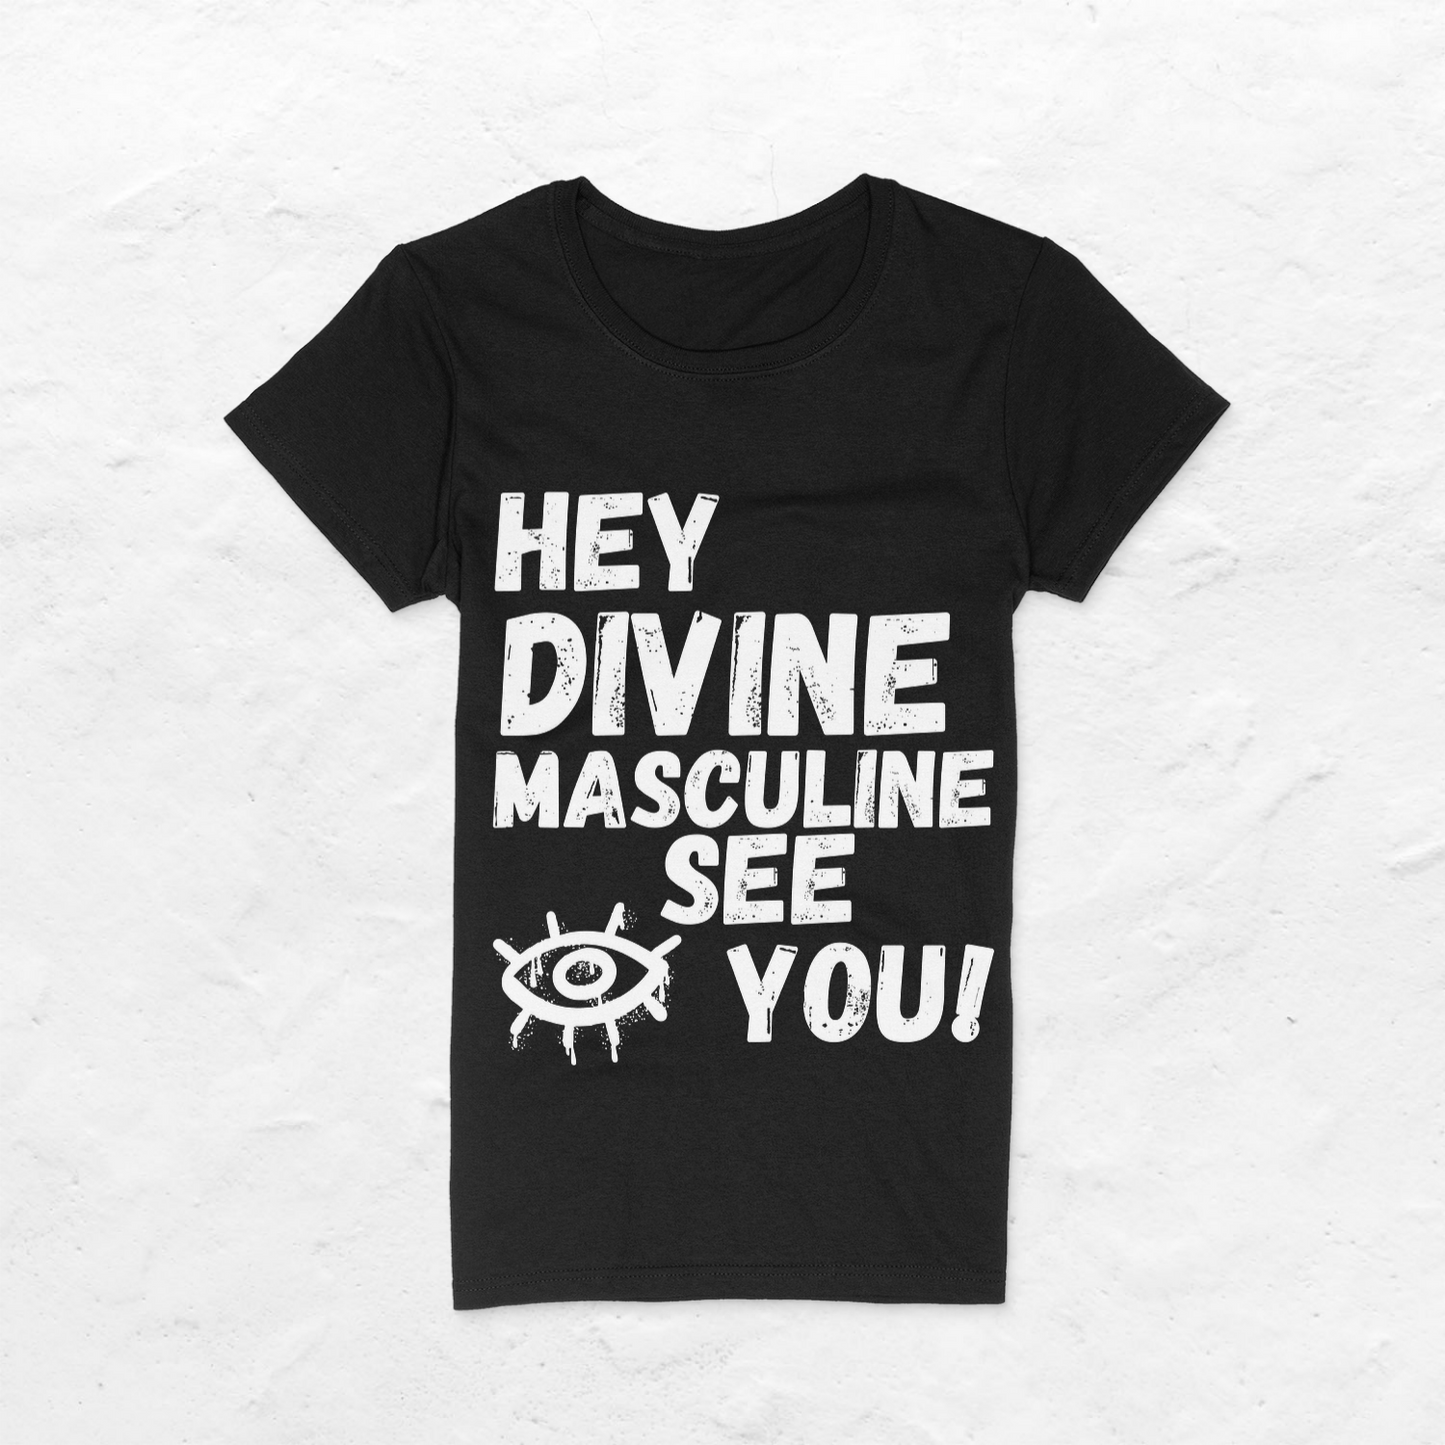 Black colored women t-shirt with the text " HEY DIVINE MASCULINE I (a picture of a eye) SEE YOU!  in white